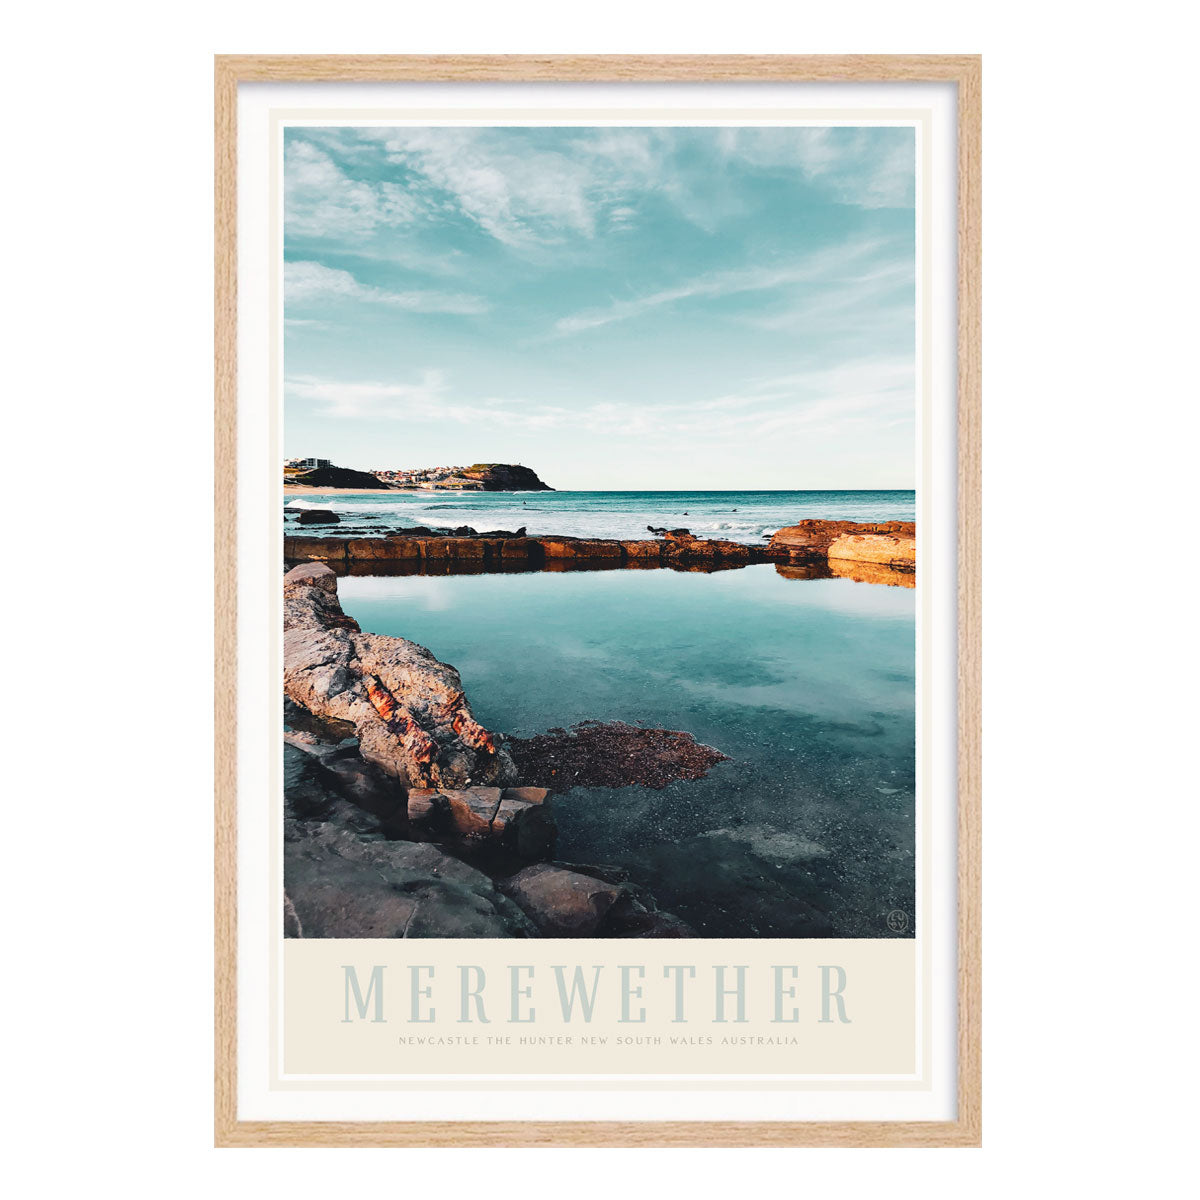 Merewether Beach vintage retro travel poster print in oak frame from Places We Luv